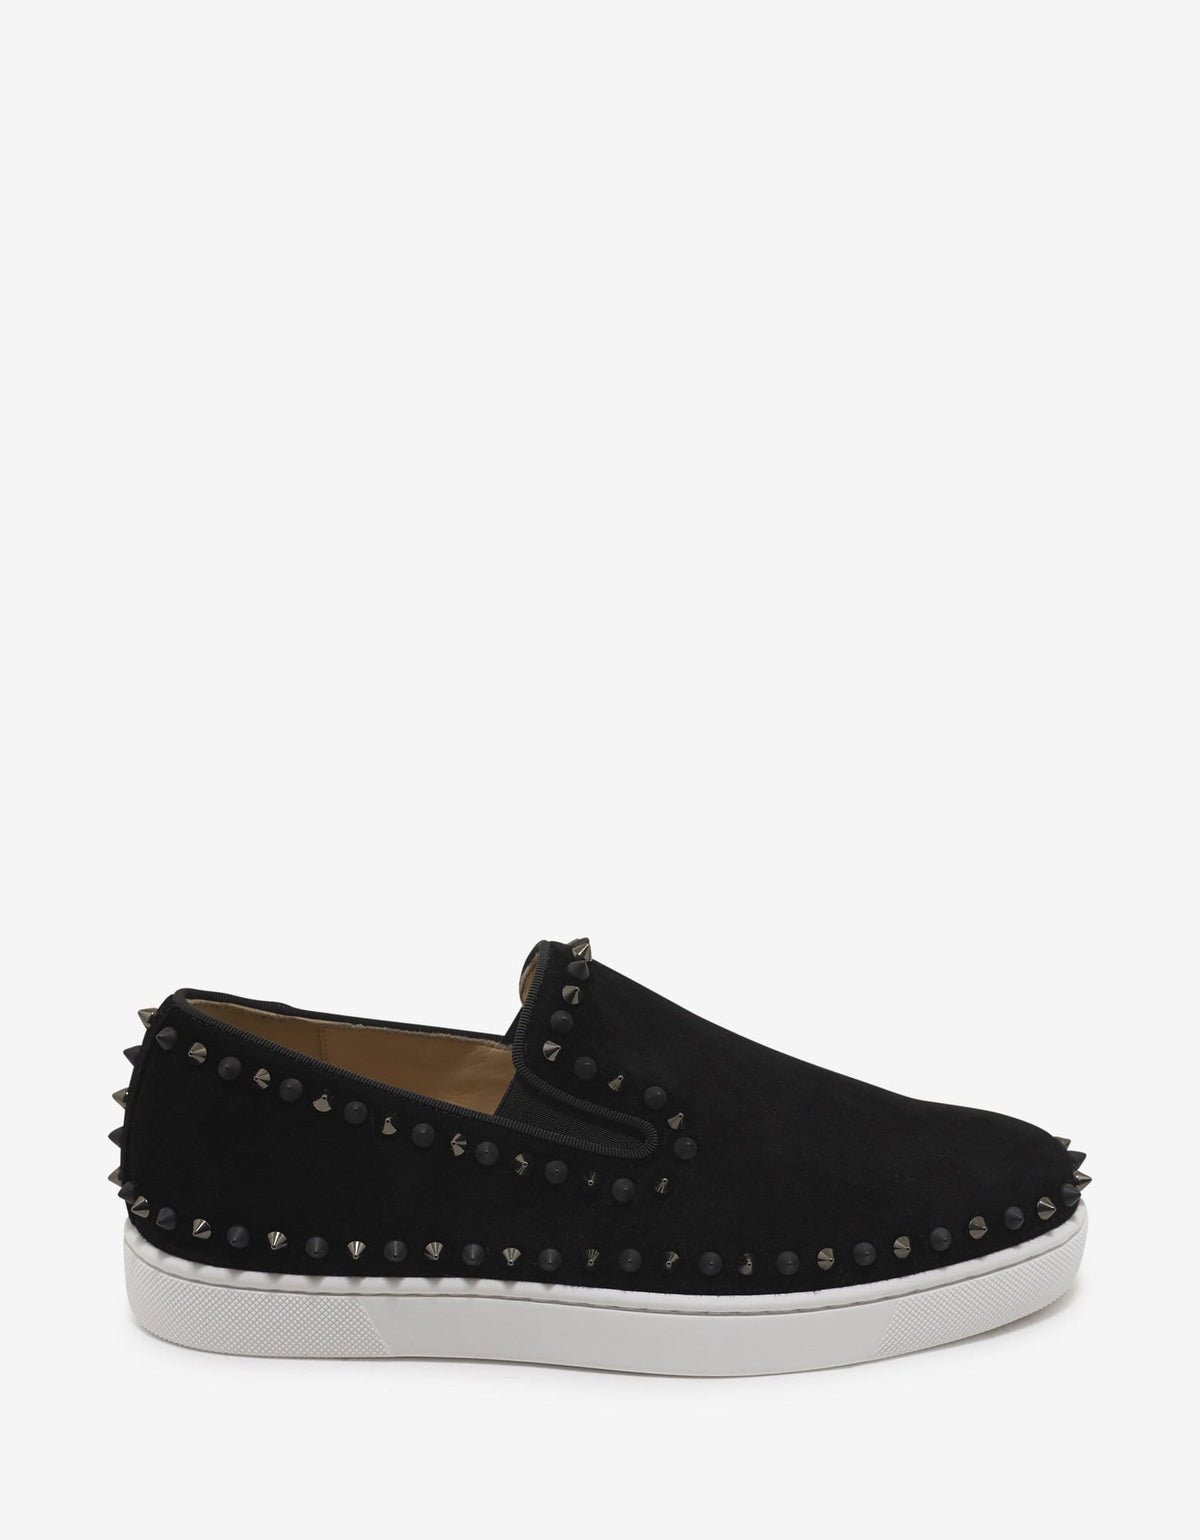 Christian Louboutin Pik Boat Flat Black Suede Mix Spikes Trainers -